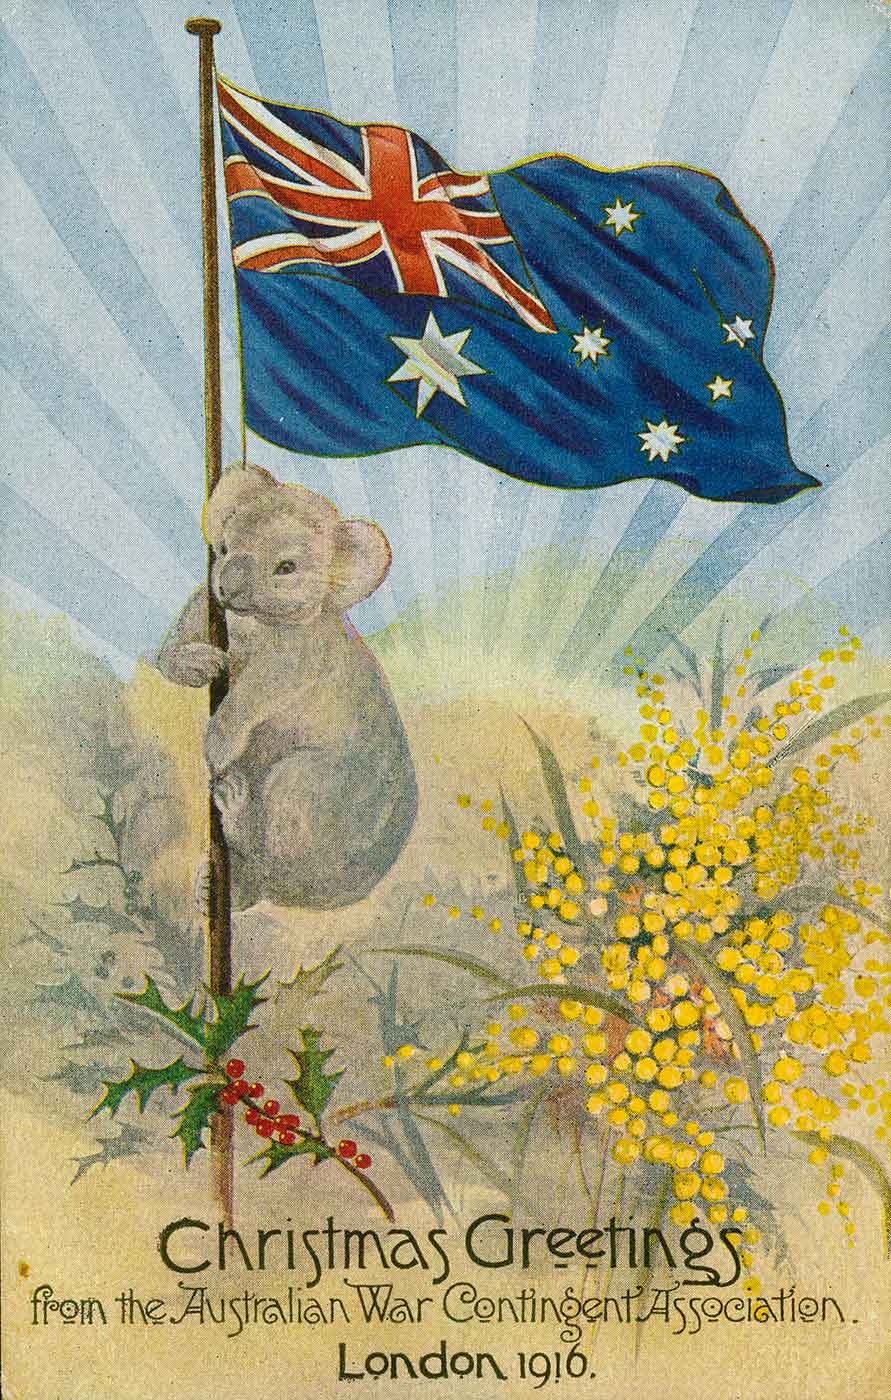 Postcard with an image of a koala climbing a flag pole which has the Australian flag at the top. There is a sprig of holly and a spray of wattle at the base of the flag pole. Text across the bottom reads 'Christmas greetings from the Australian War Contingent Association., London 1916.' - click to view larger image